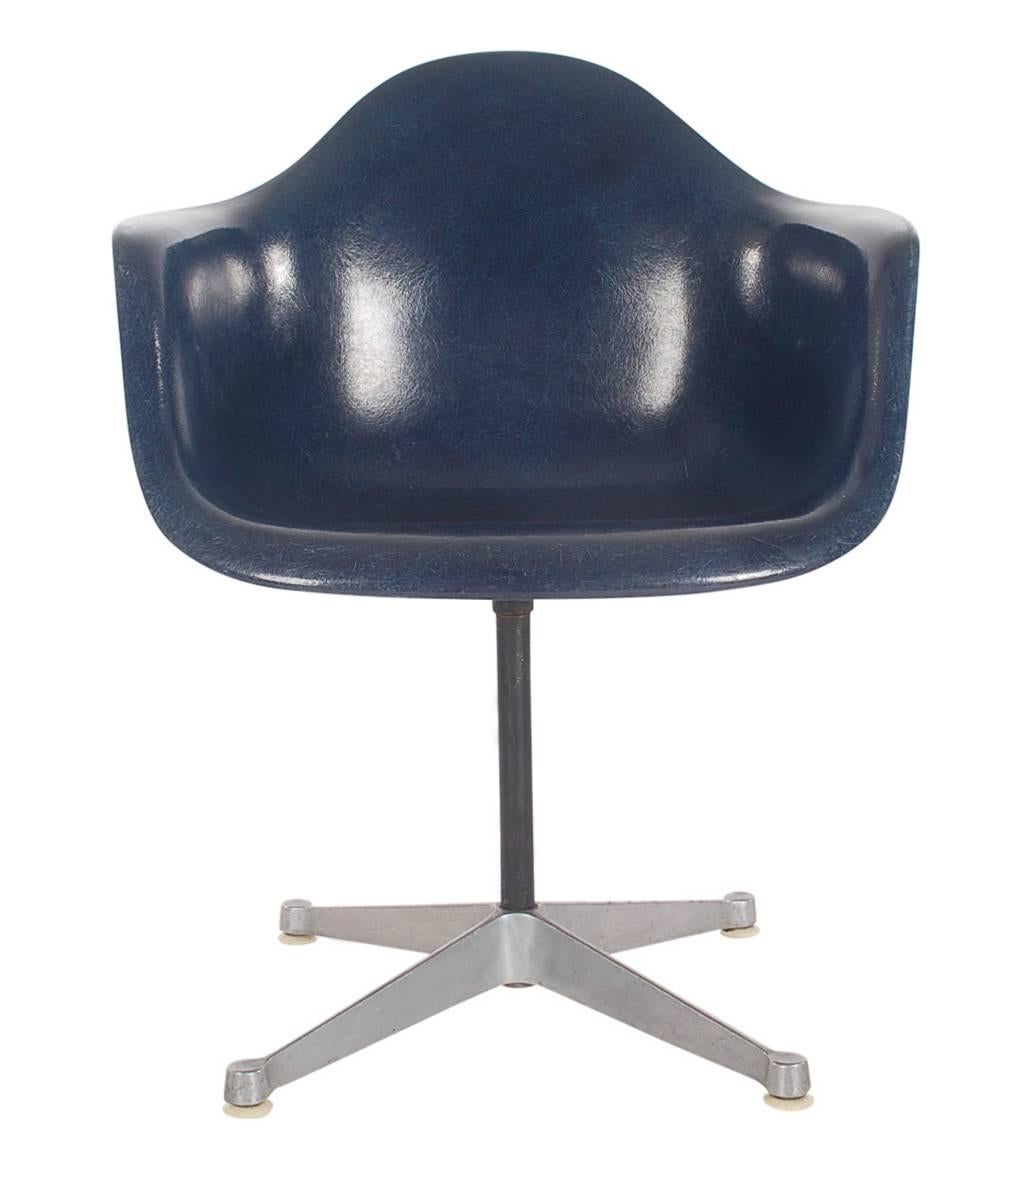 American Mid-Century Charles Eames for Herman Miller Fiberglass Dining Chairs in Navy